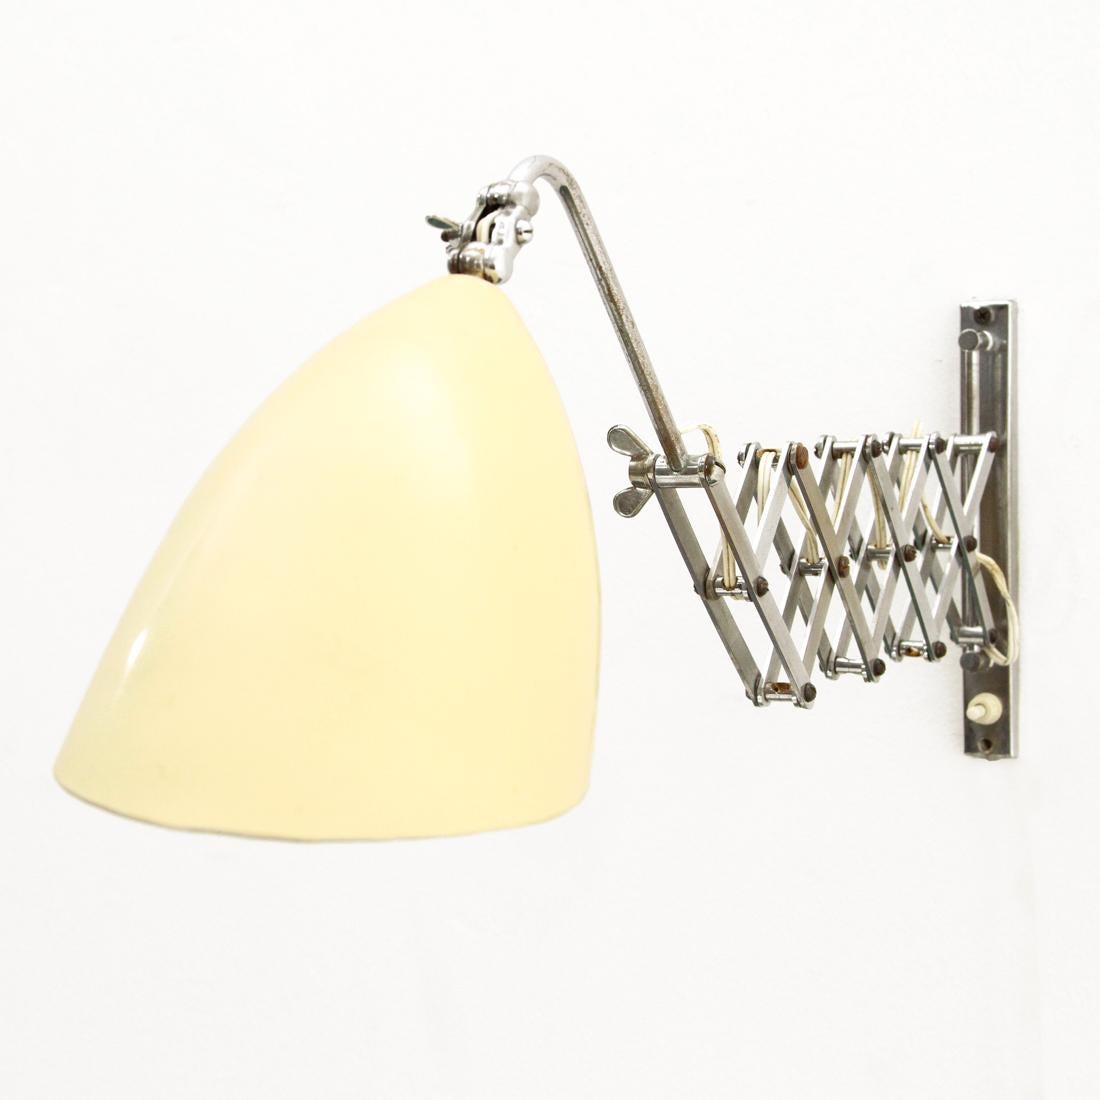 Italian-made wall lamp produced in the 1950s.
Wall fixing base and pantograph stem, in chromed brass.
Diffuser in white cream painted metal.
Extendable stem, articulated and directional diffuser.
Good general condition, some signs due to normal